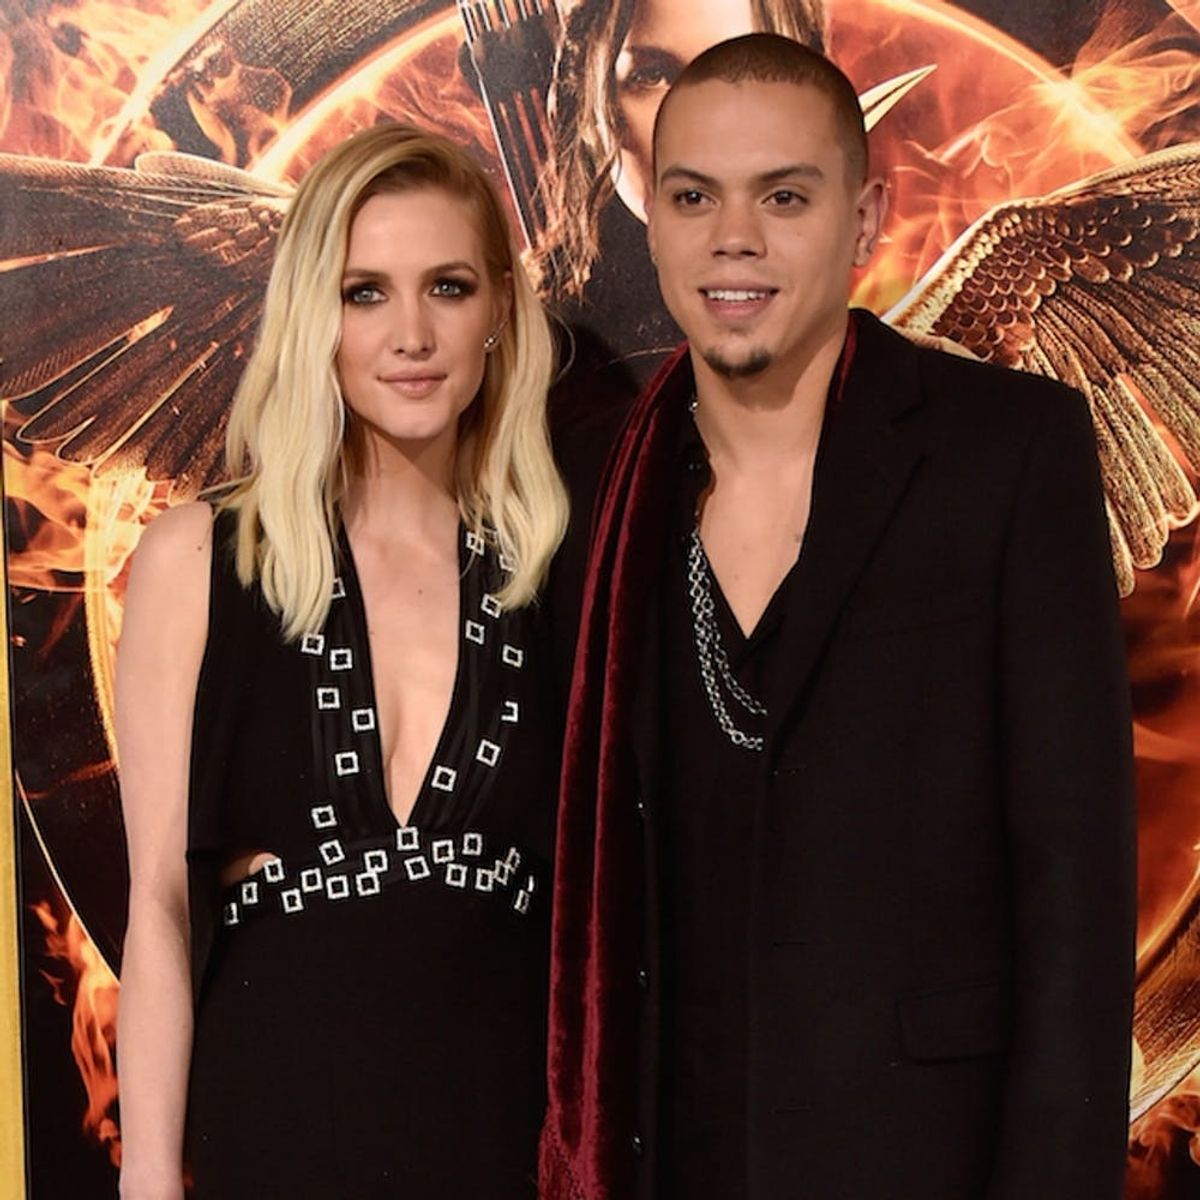 Ashlee Simpson’s Family Portrait With Her Newborn Will Make You Go Aww